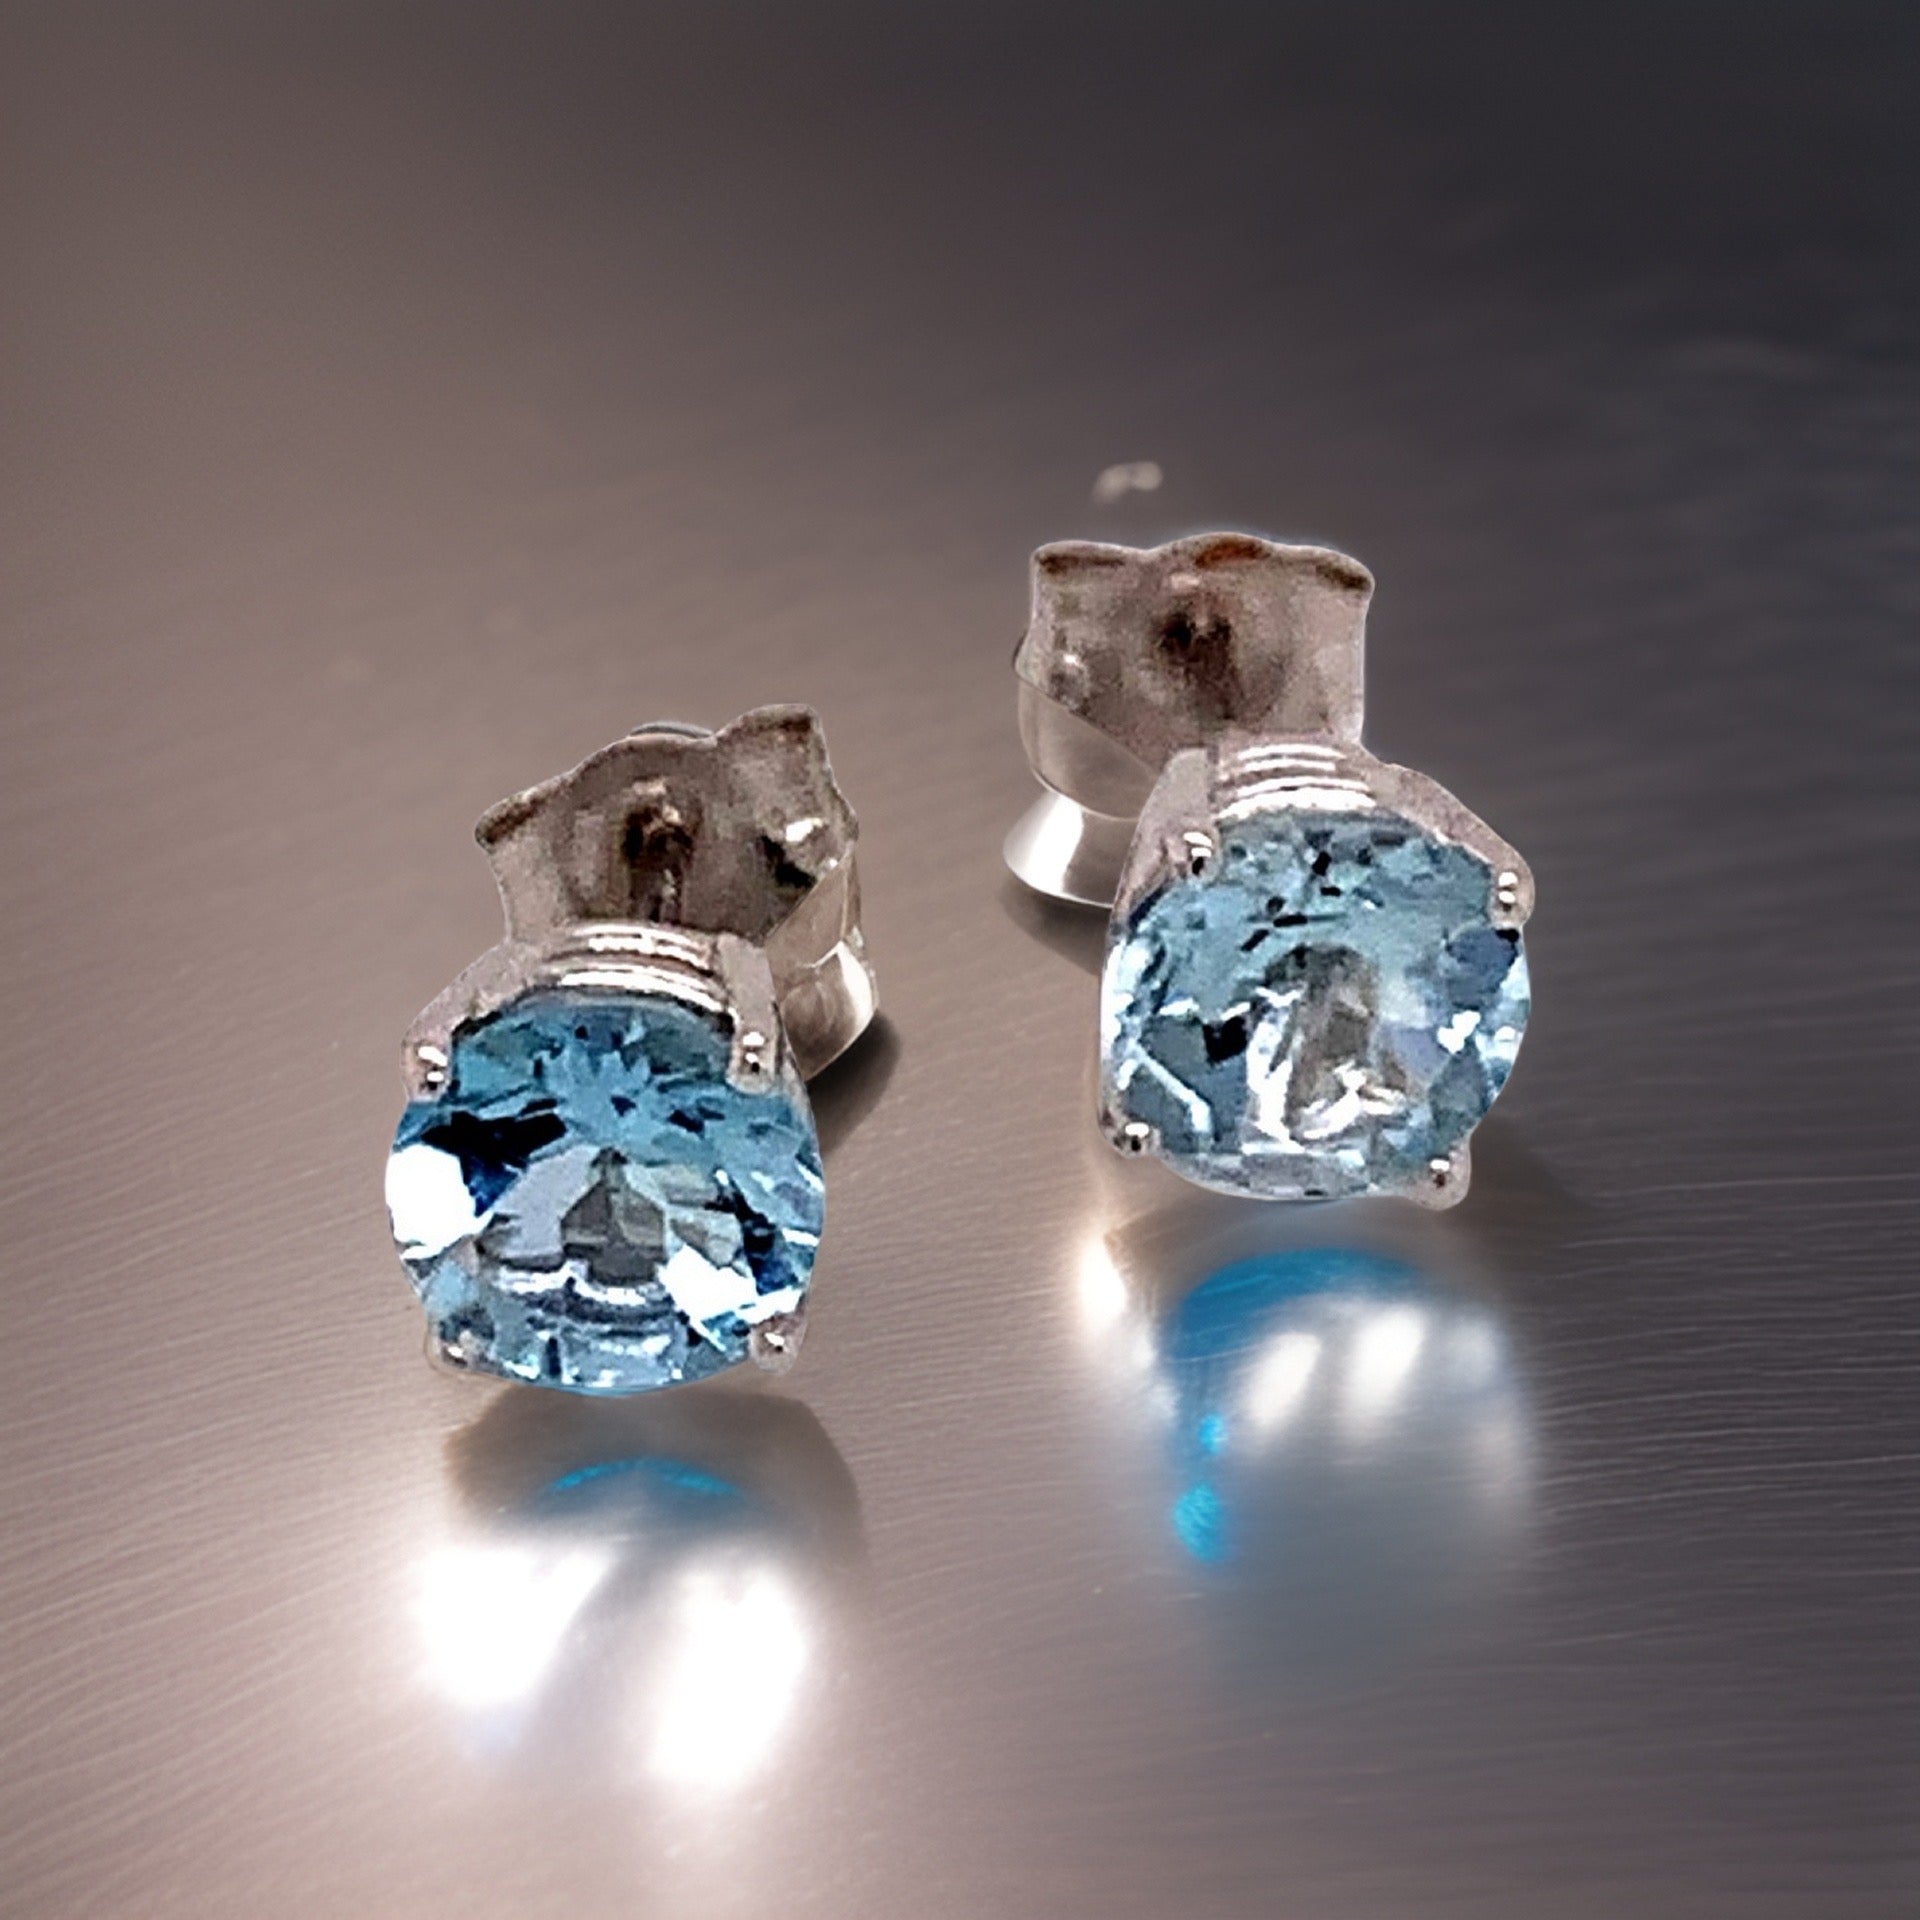 Natural Aquamarine Stud Earrings 14k White Gold 1.0 CTW Certified $590 111539 - Certified Fine Jewelry